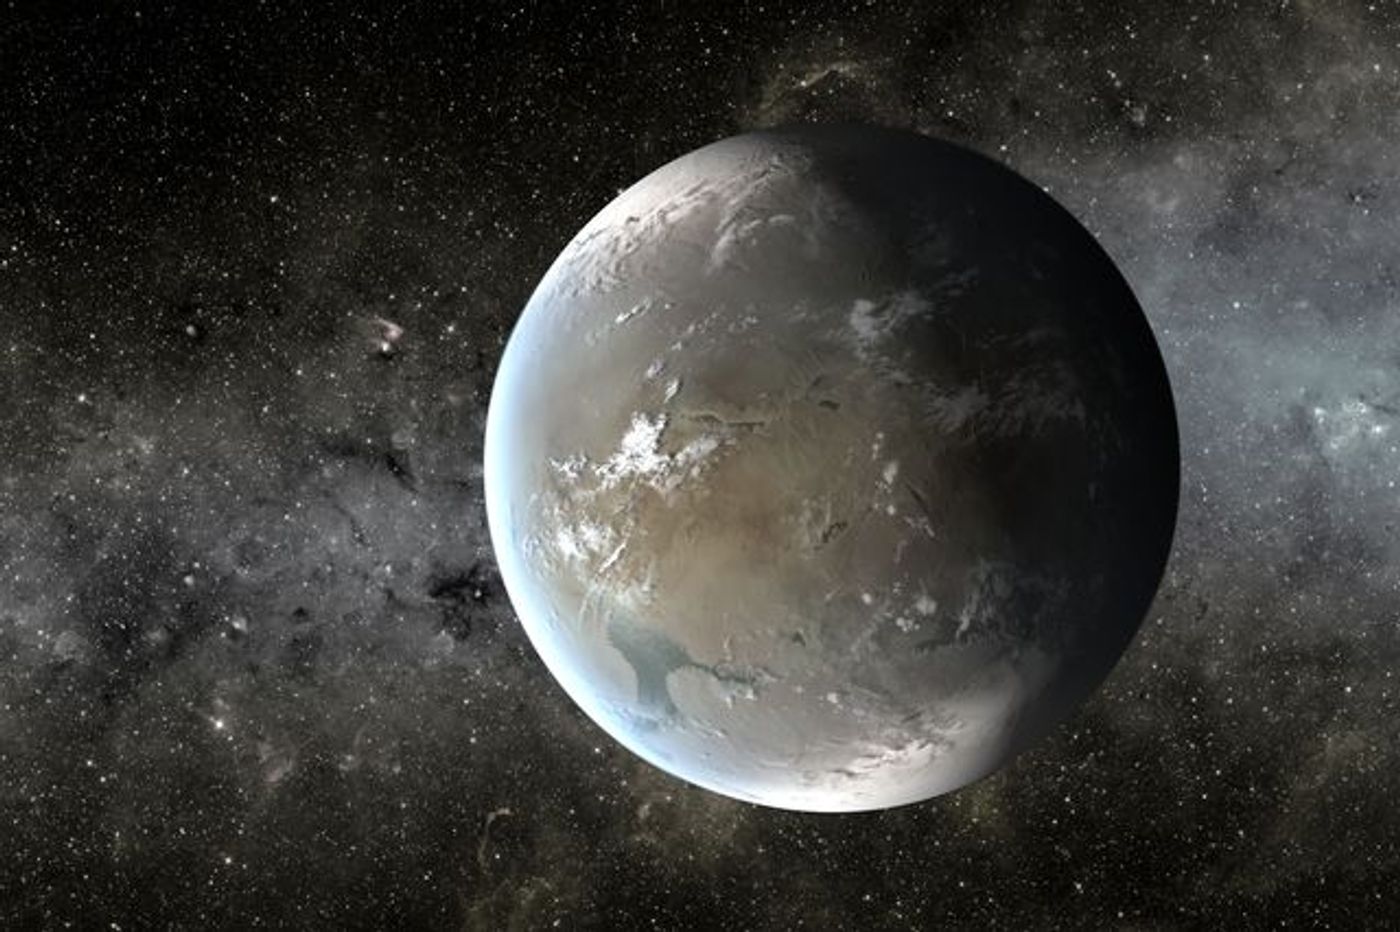 An Earth-like exoplanet around 1,200 light years away from us may have the conditions necessary to be habitable, study says.